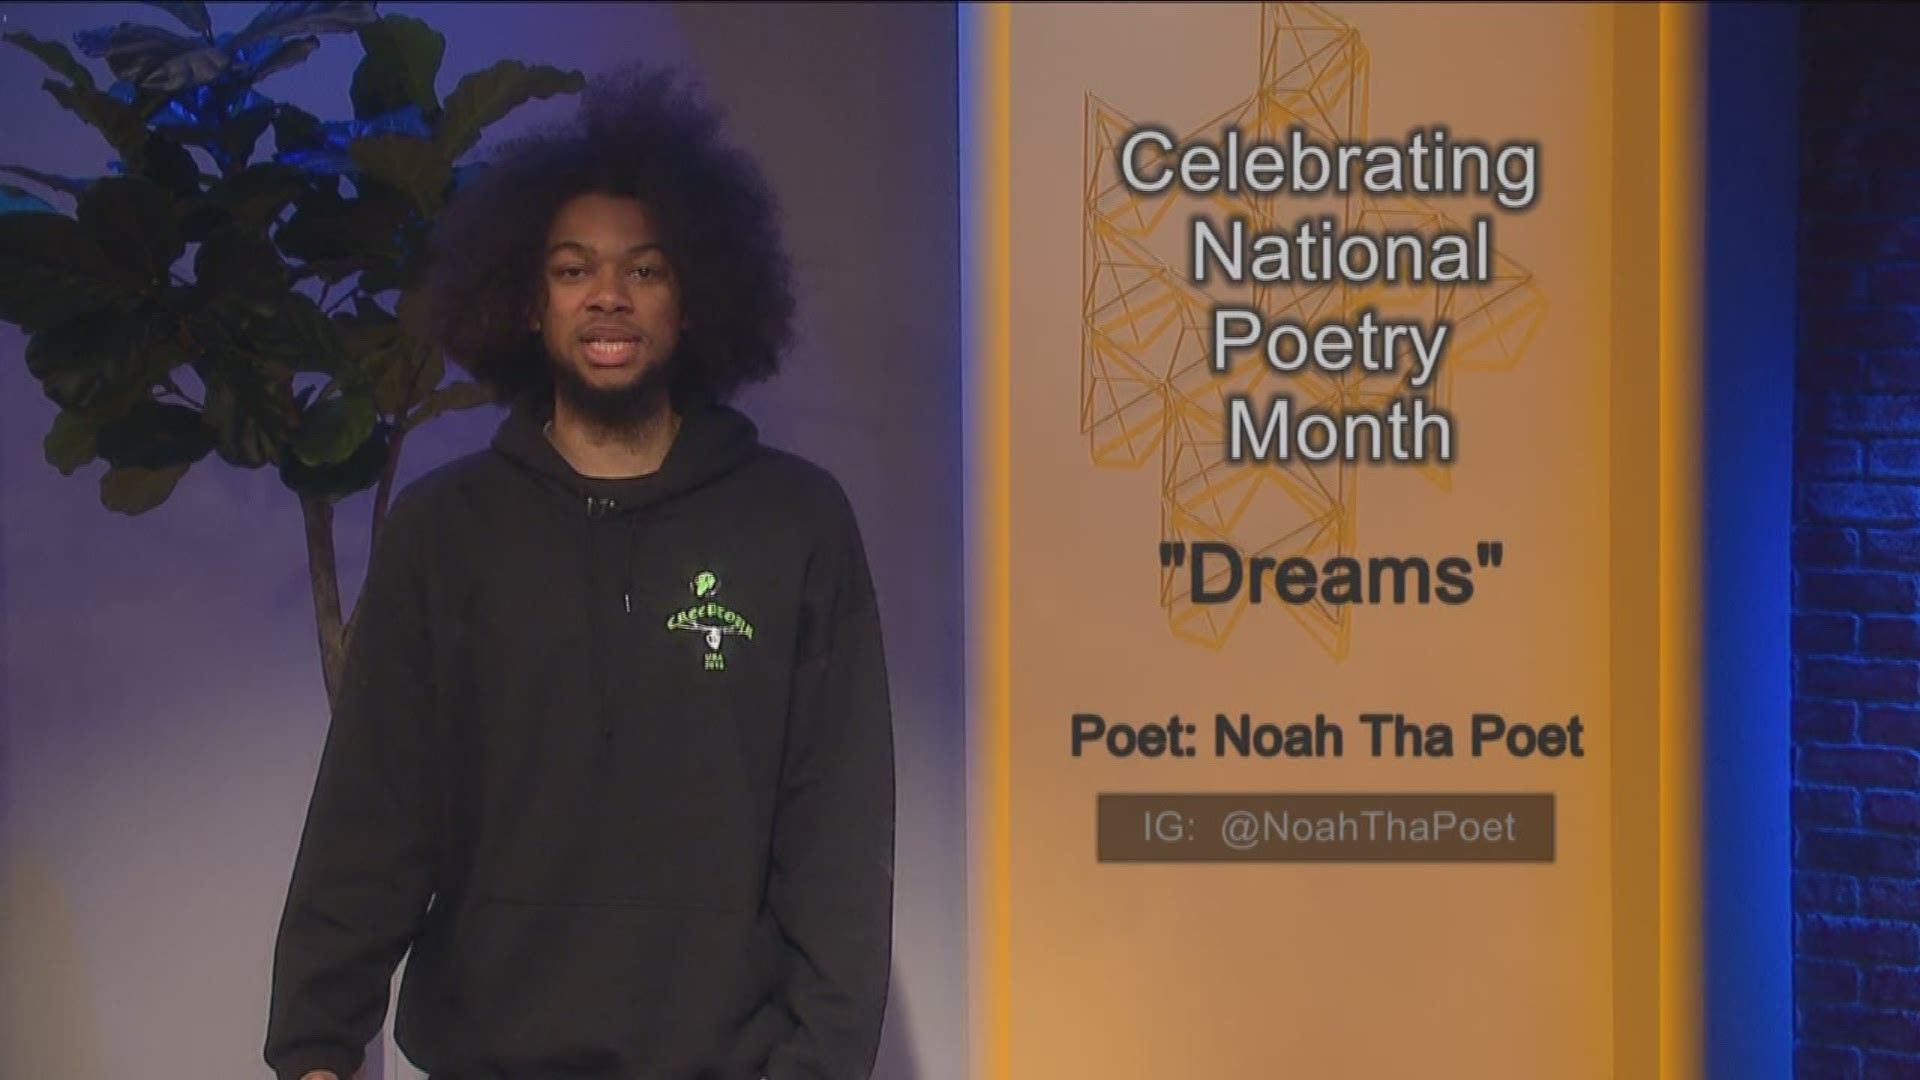 In honor of National Poetry Month, Noah the poet performs his original piece entitled "Dreams".